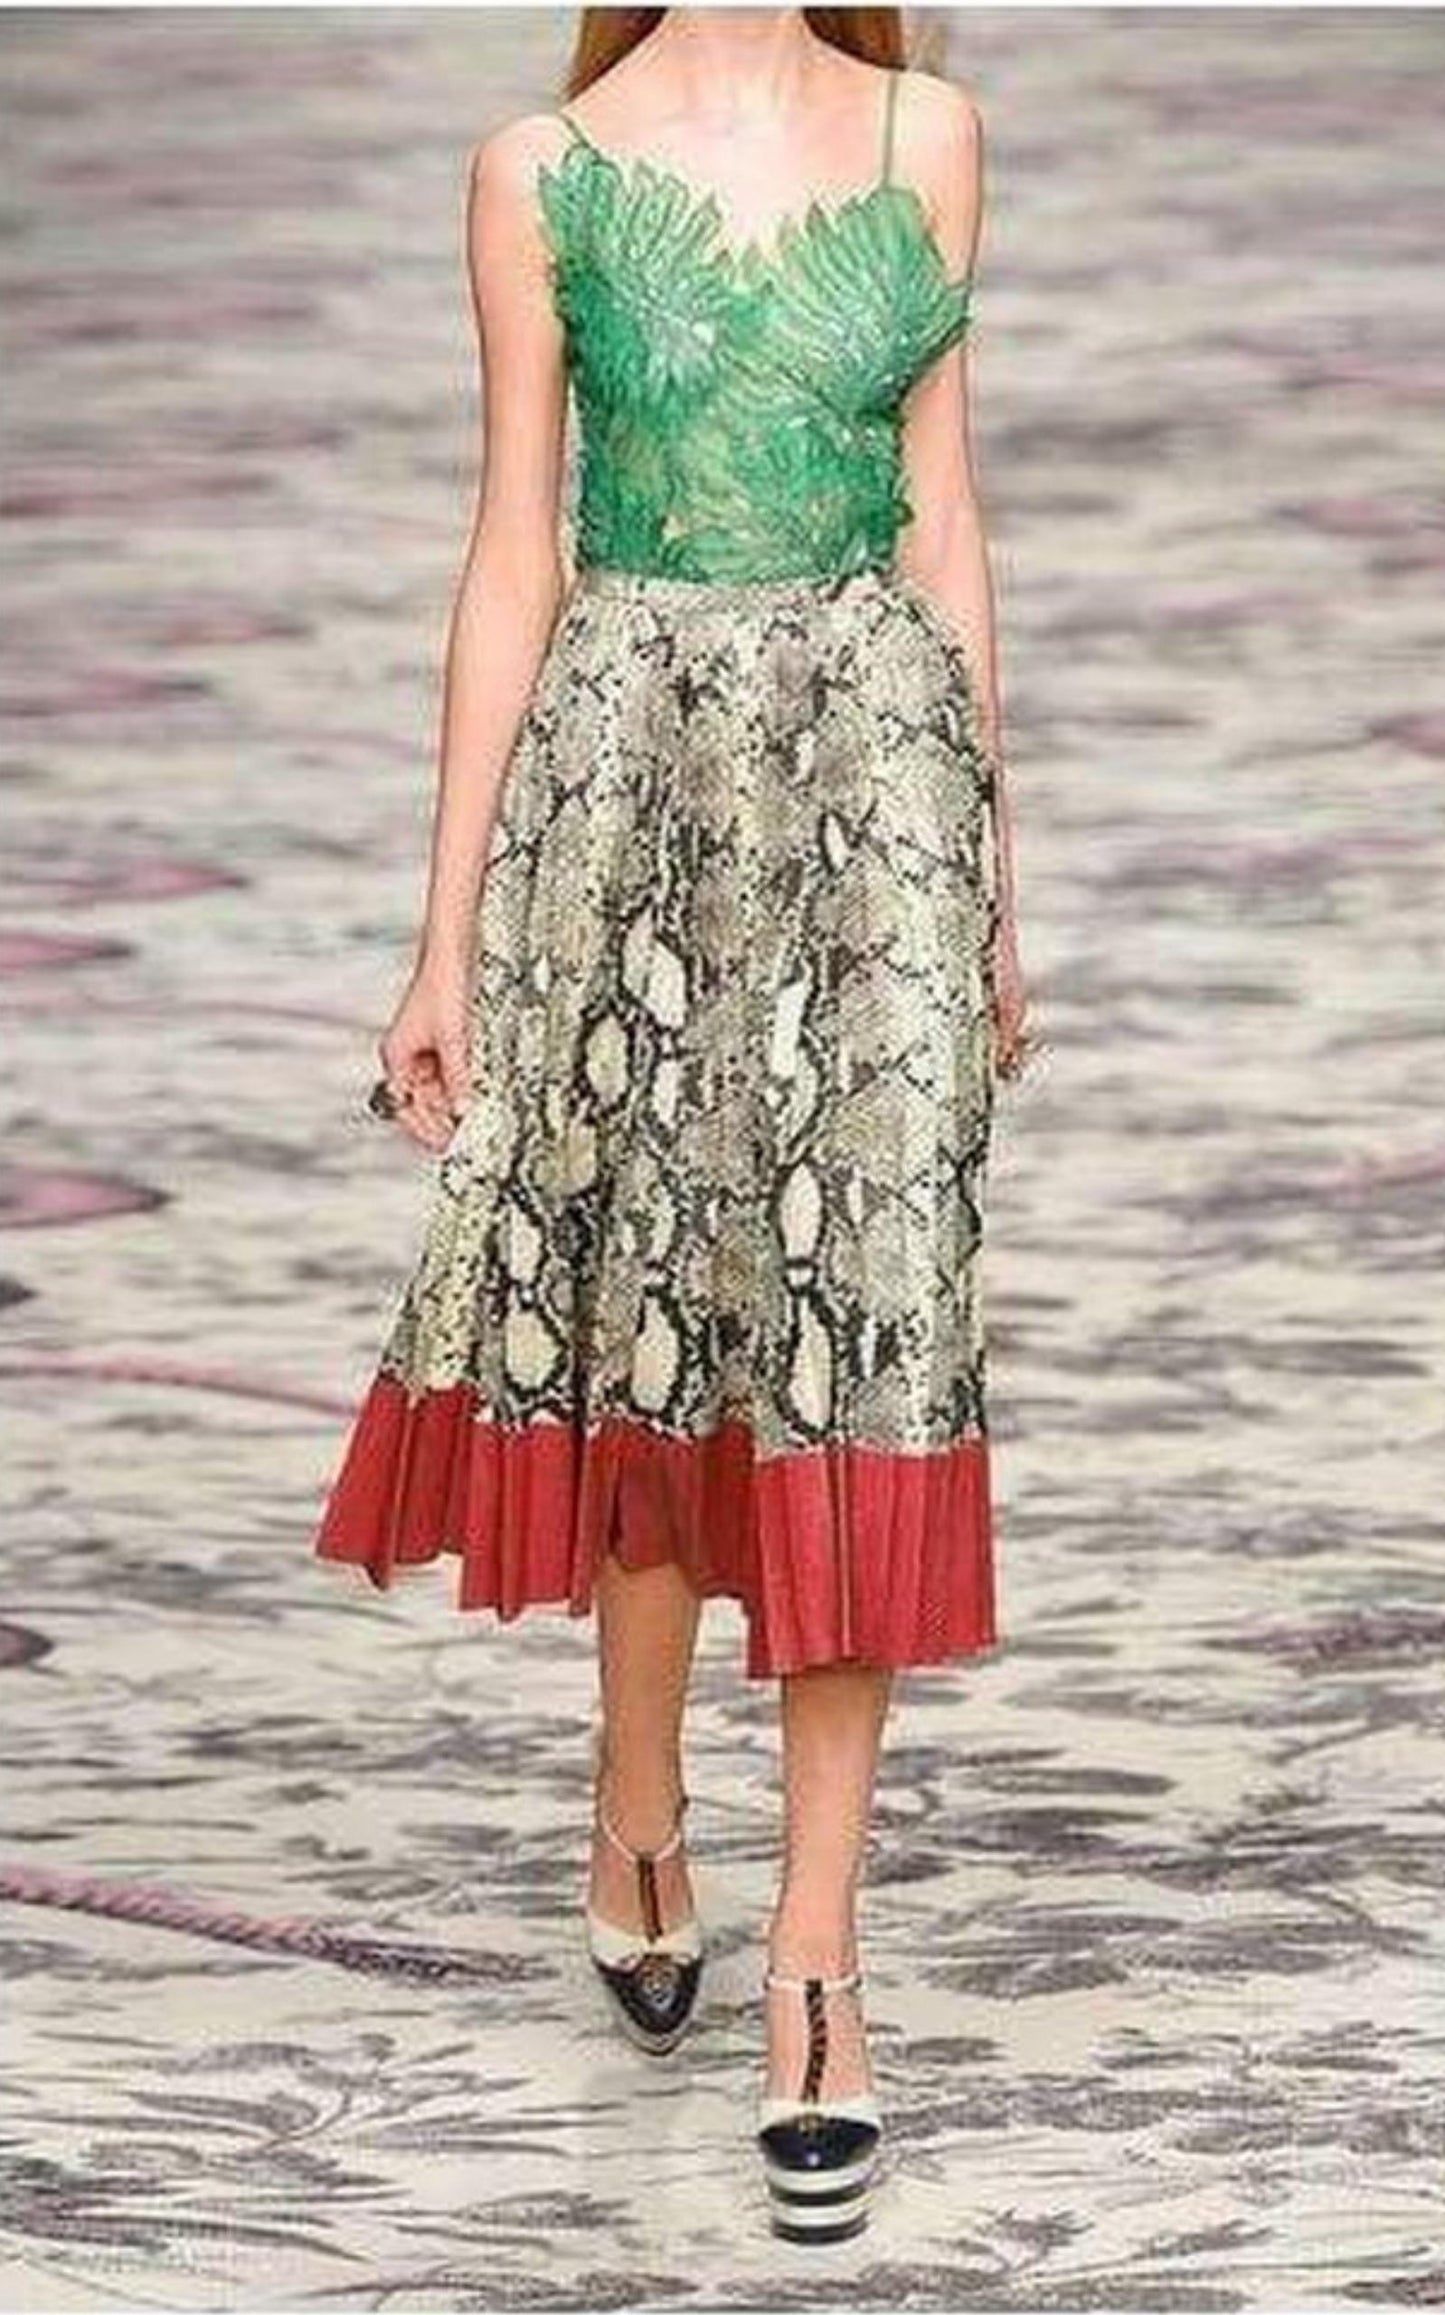  GucciPleated Snake-Effect Leather Skirt - Runway Catalog